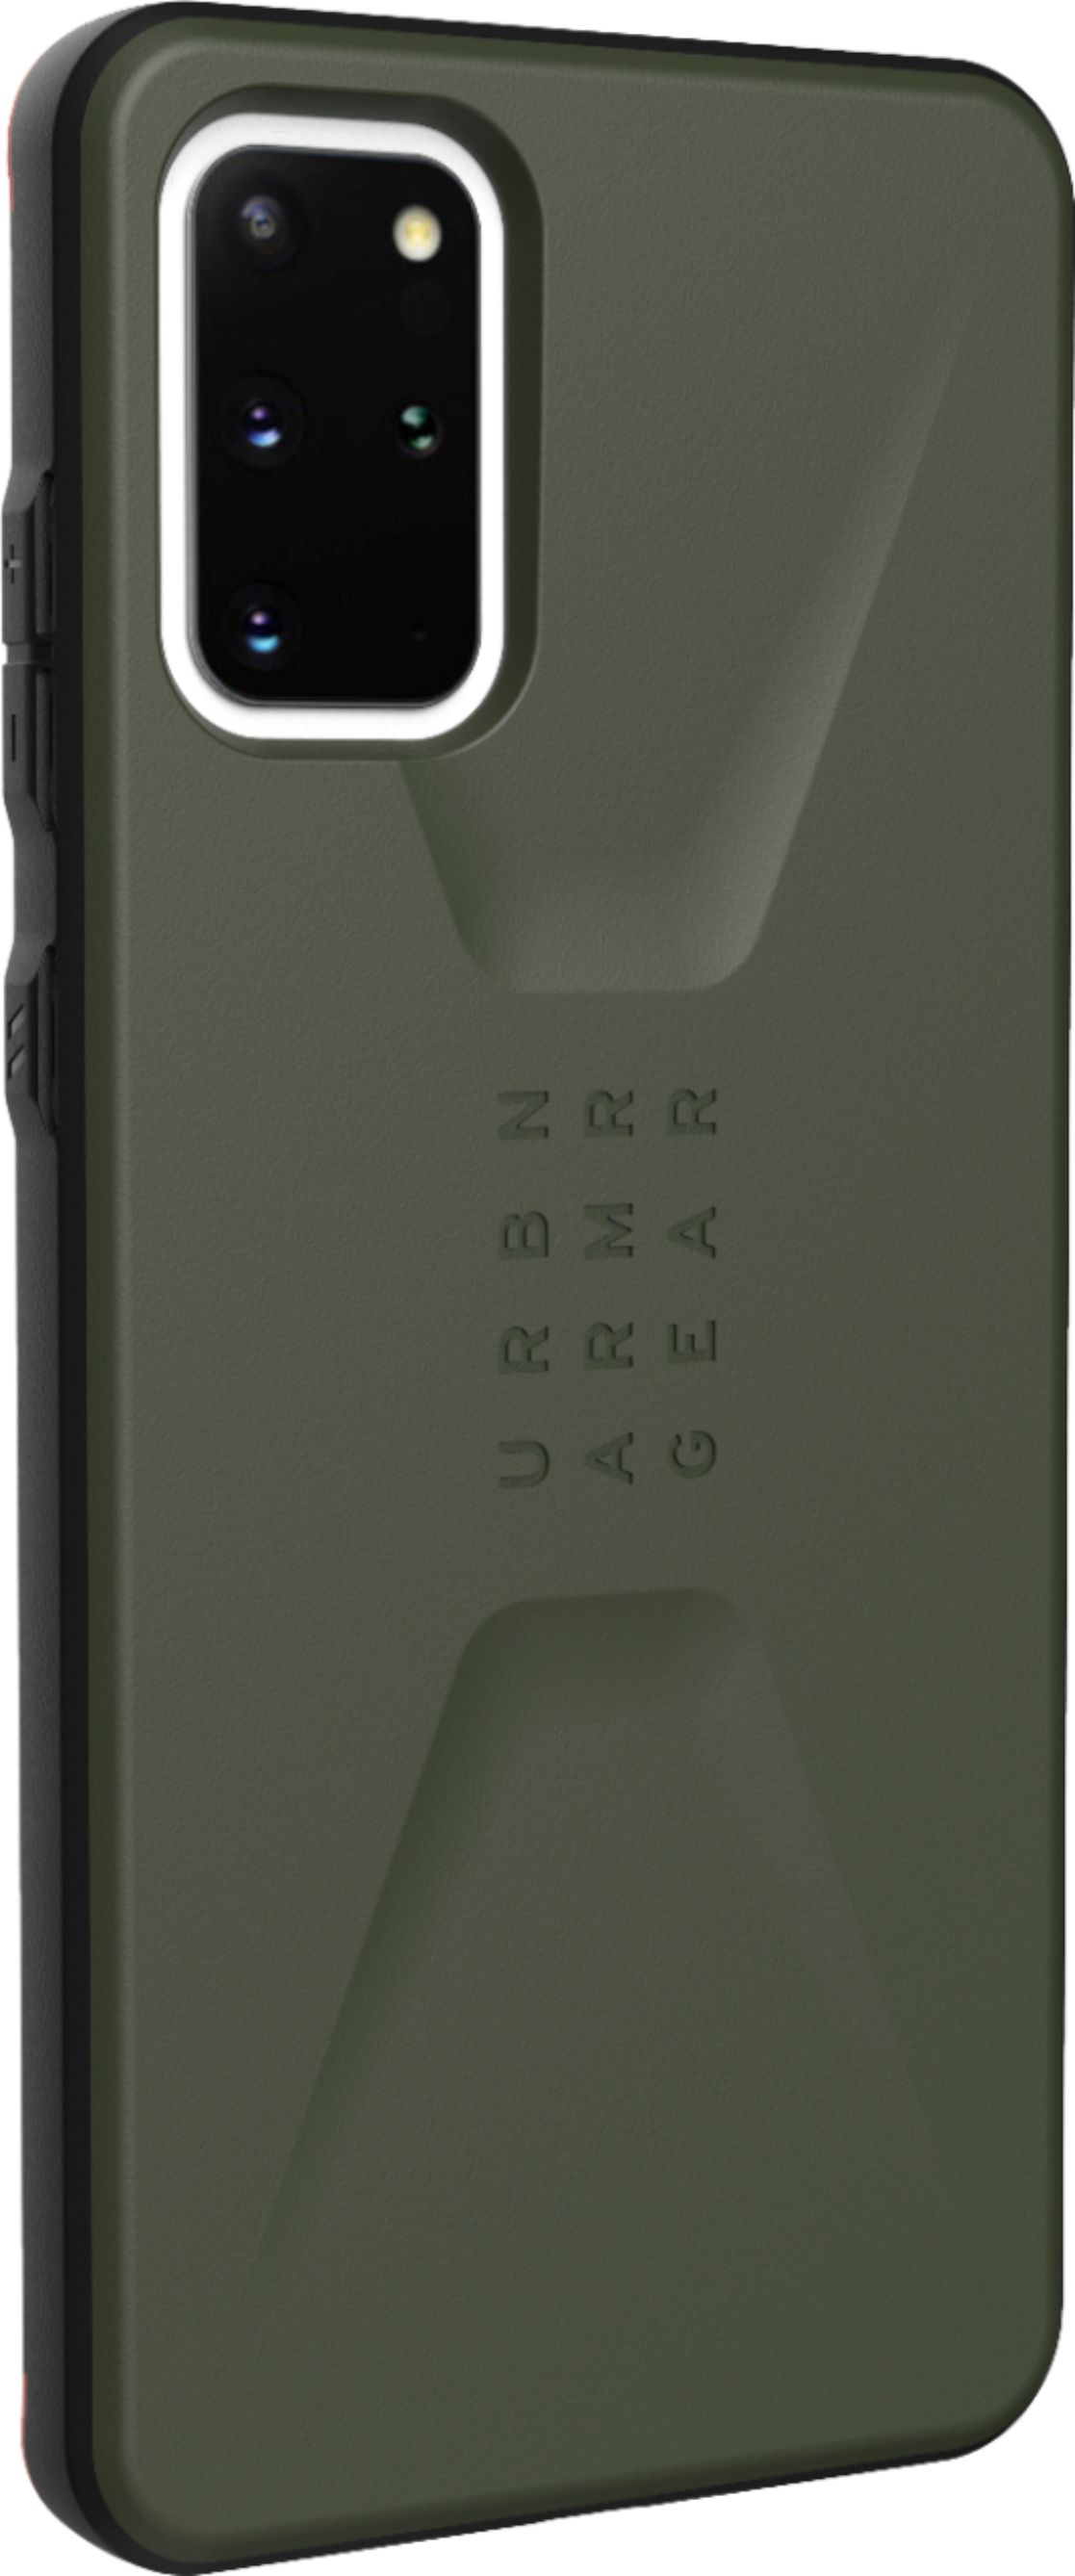 Angle View: UAG - Civilian Series Case for Samsung Galaxy S20+ 5G - Olive Drab